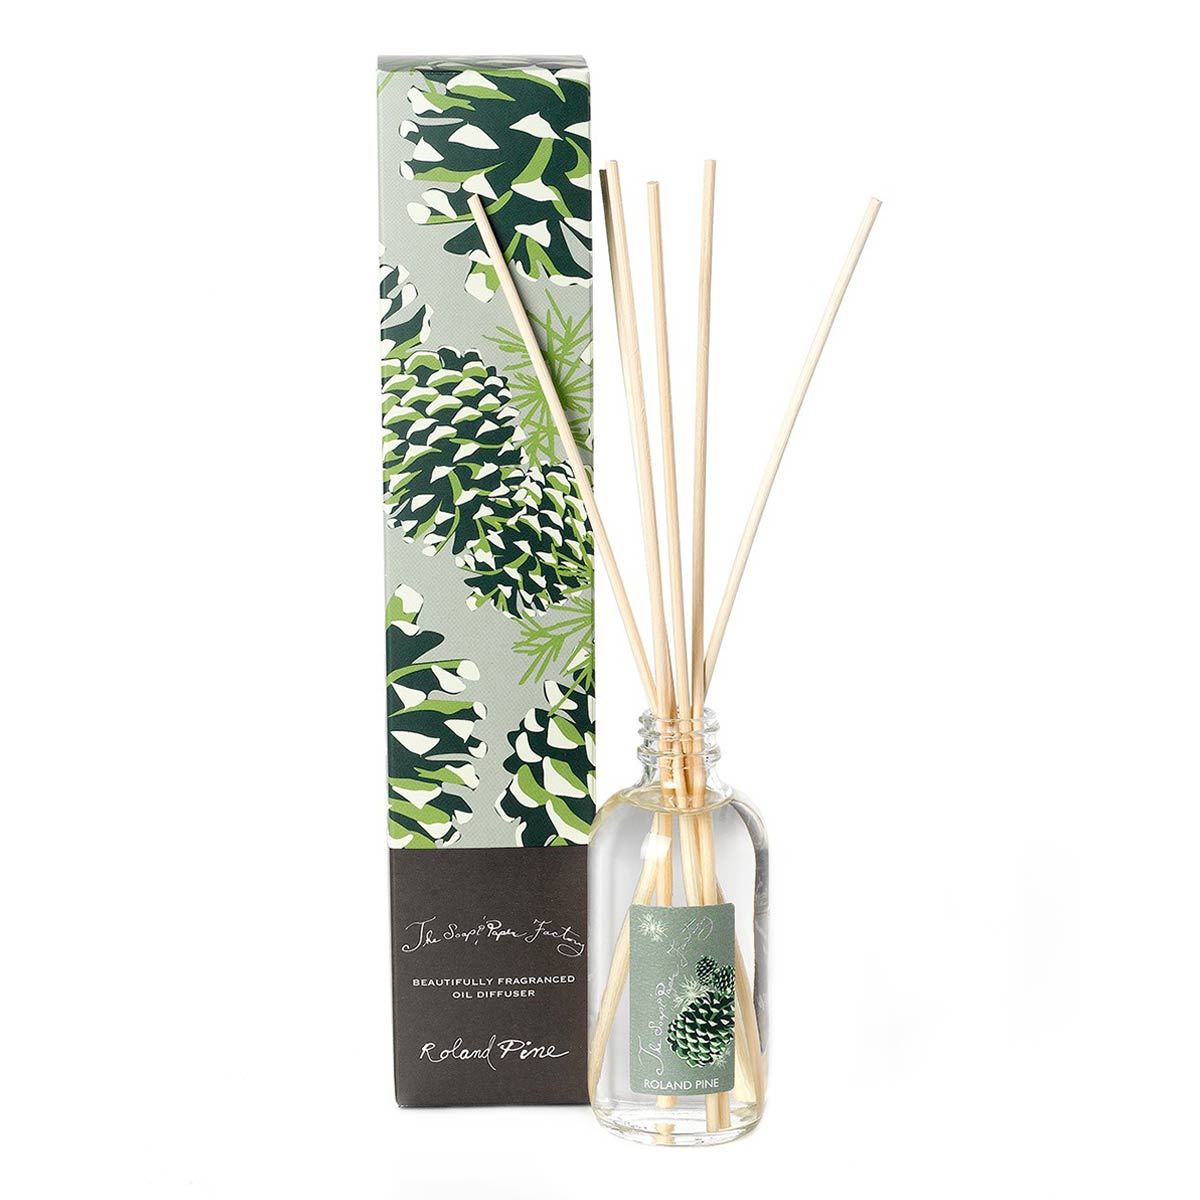 Primary image of Roland Pine Room Diffuser